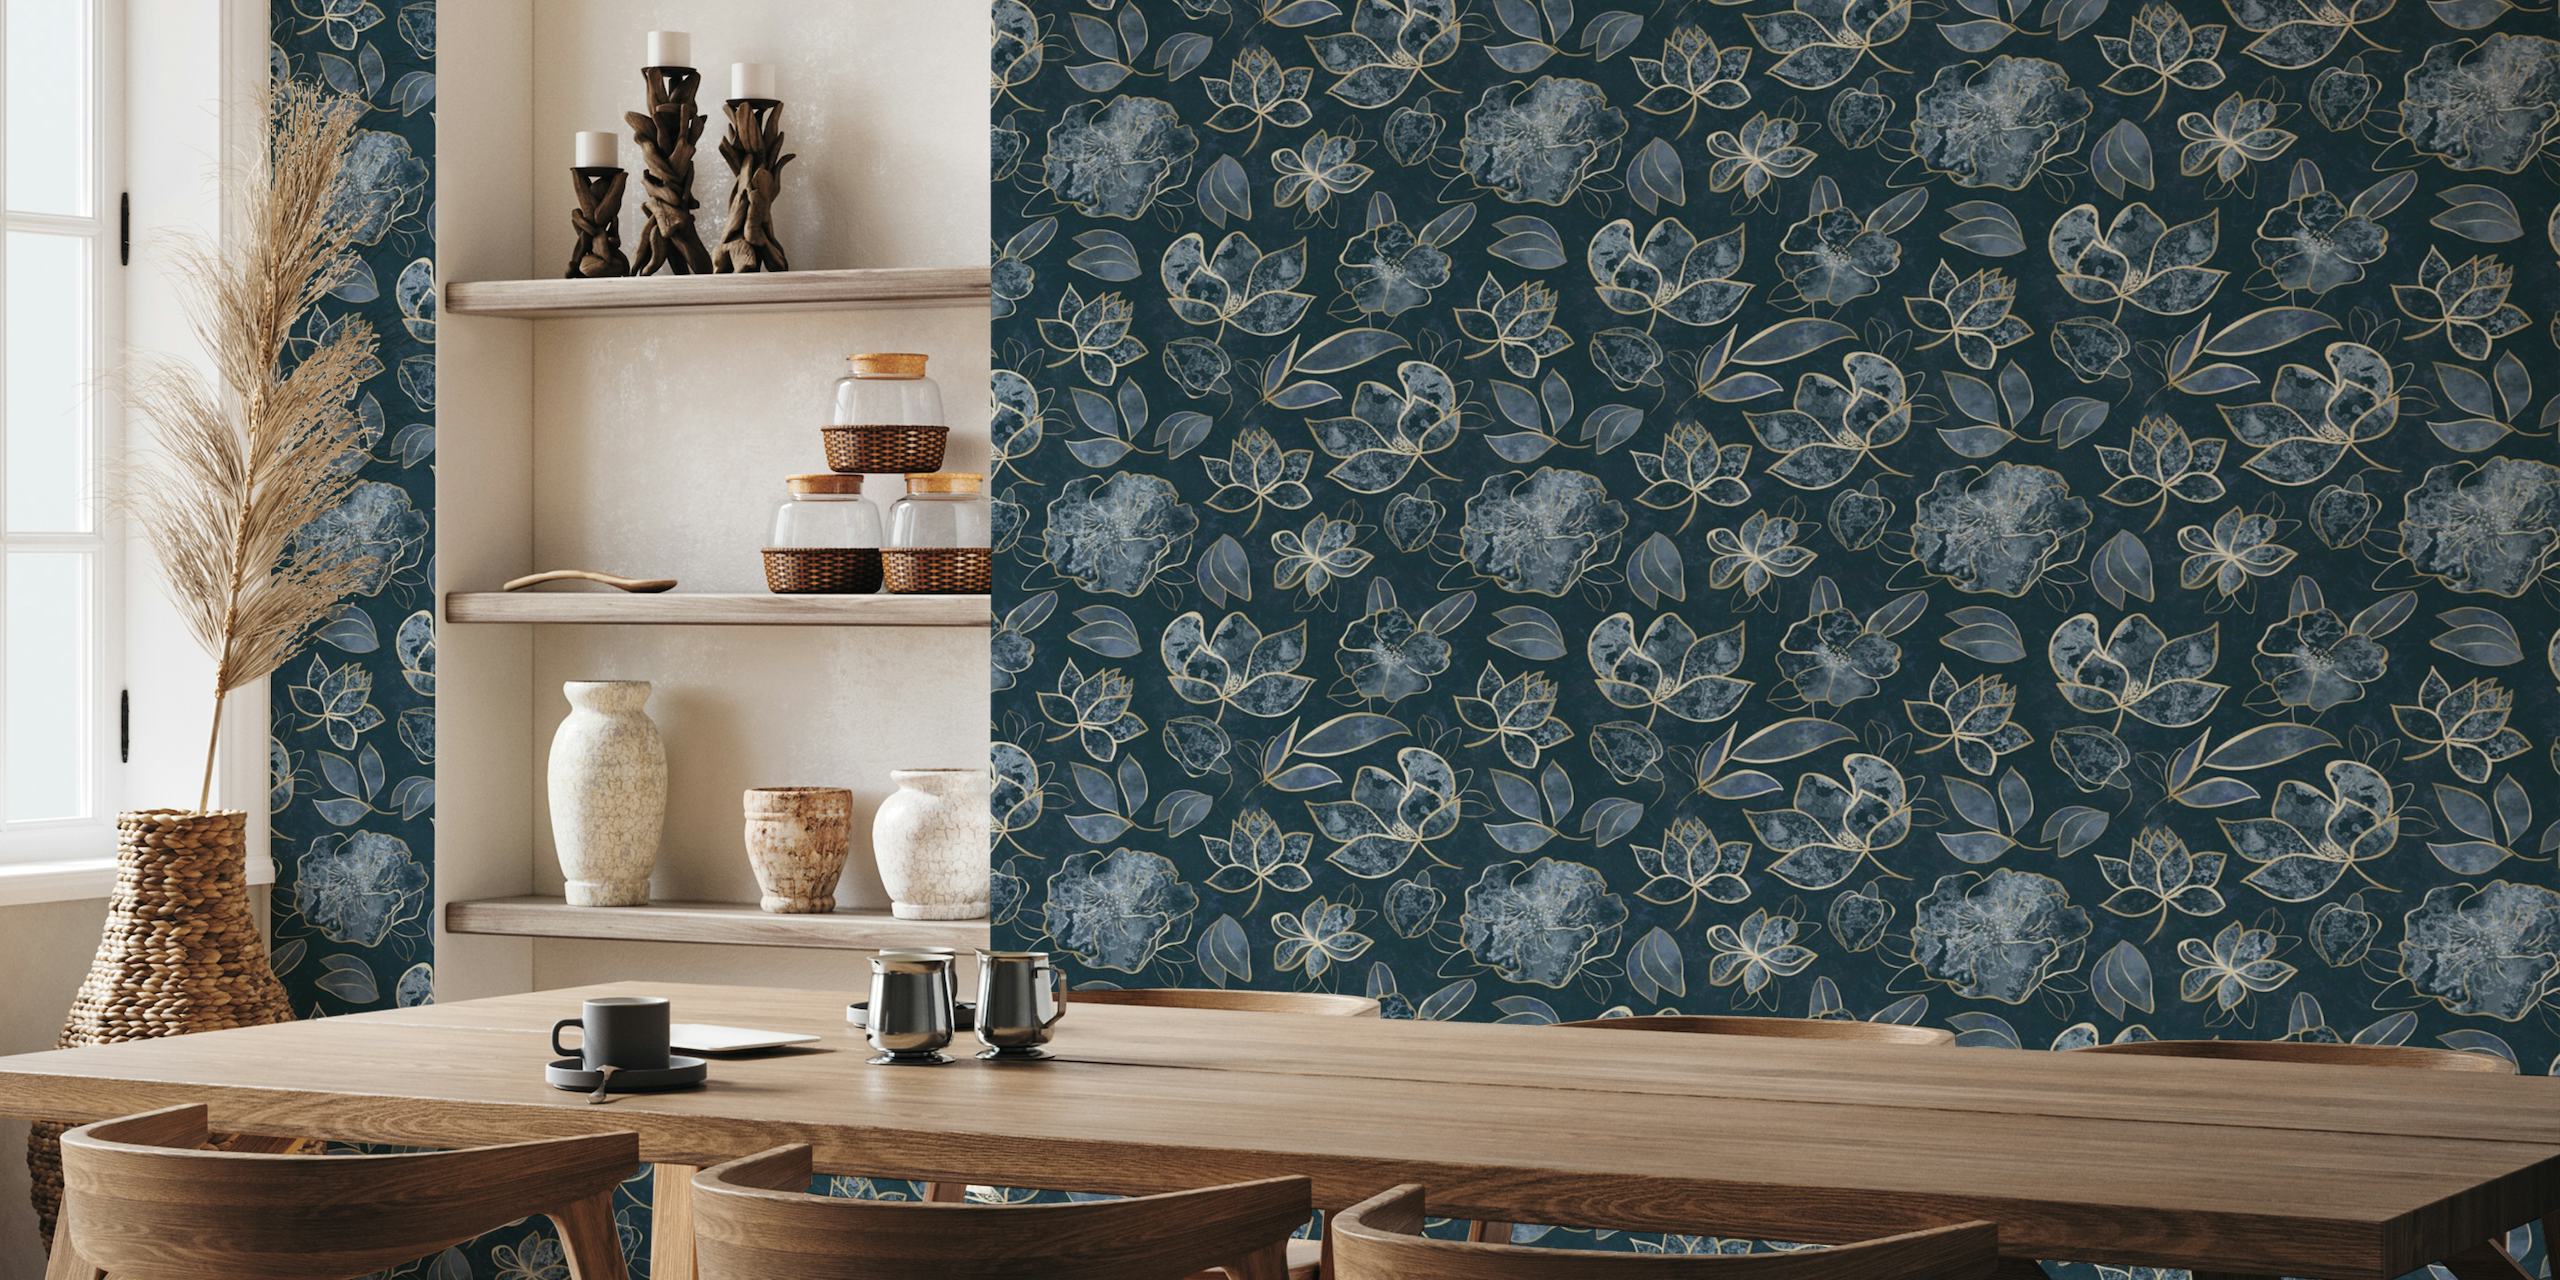 Elegant turquoise and gold fantasy flower pattern wall mural